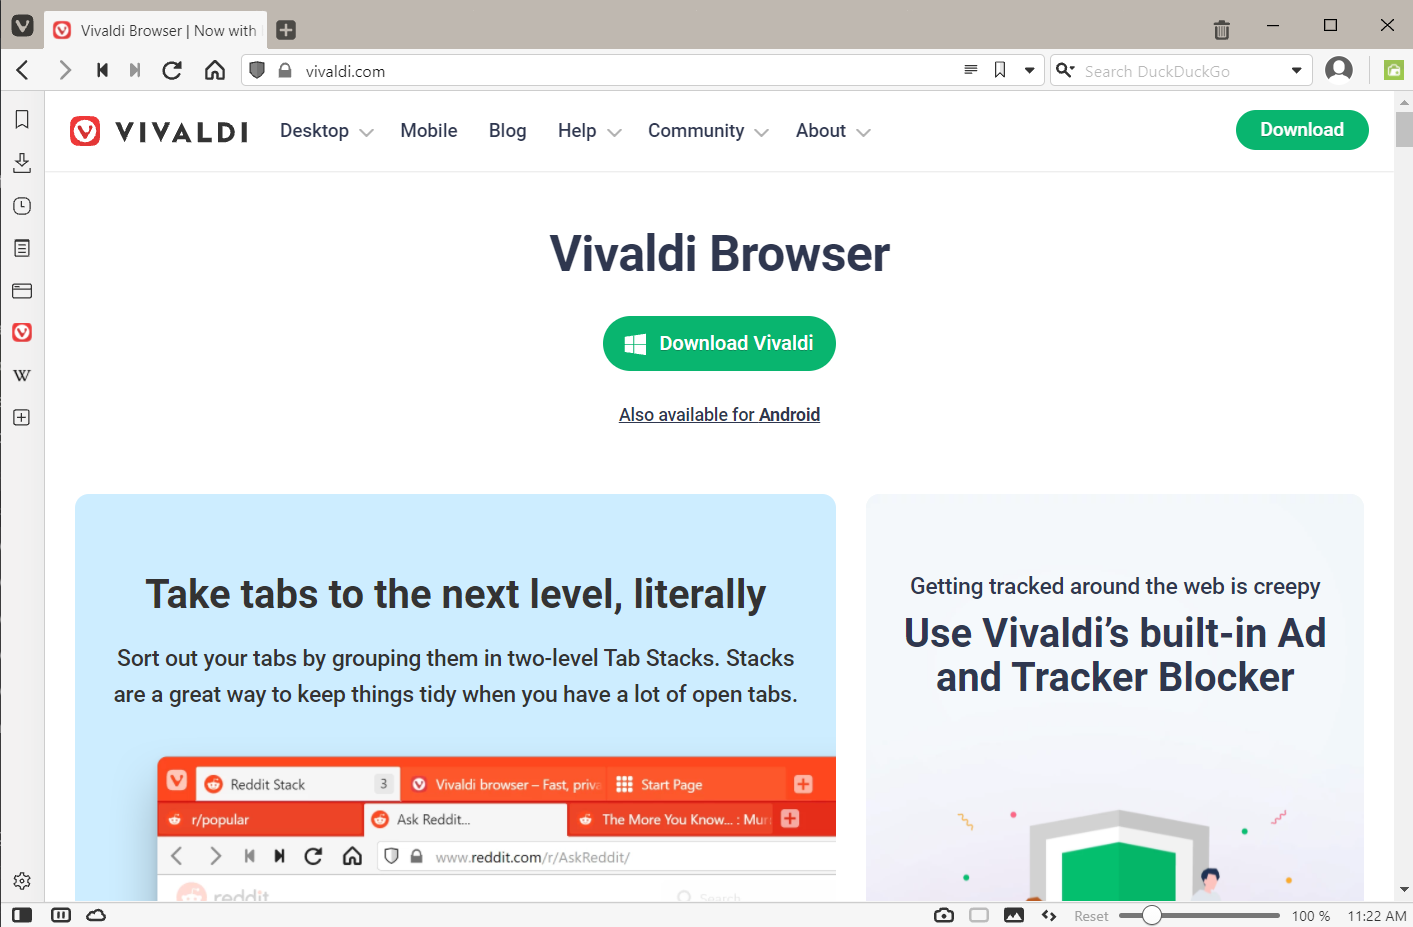 Vivaldi is a privacy-oriented web browser with advanced customizability.